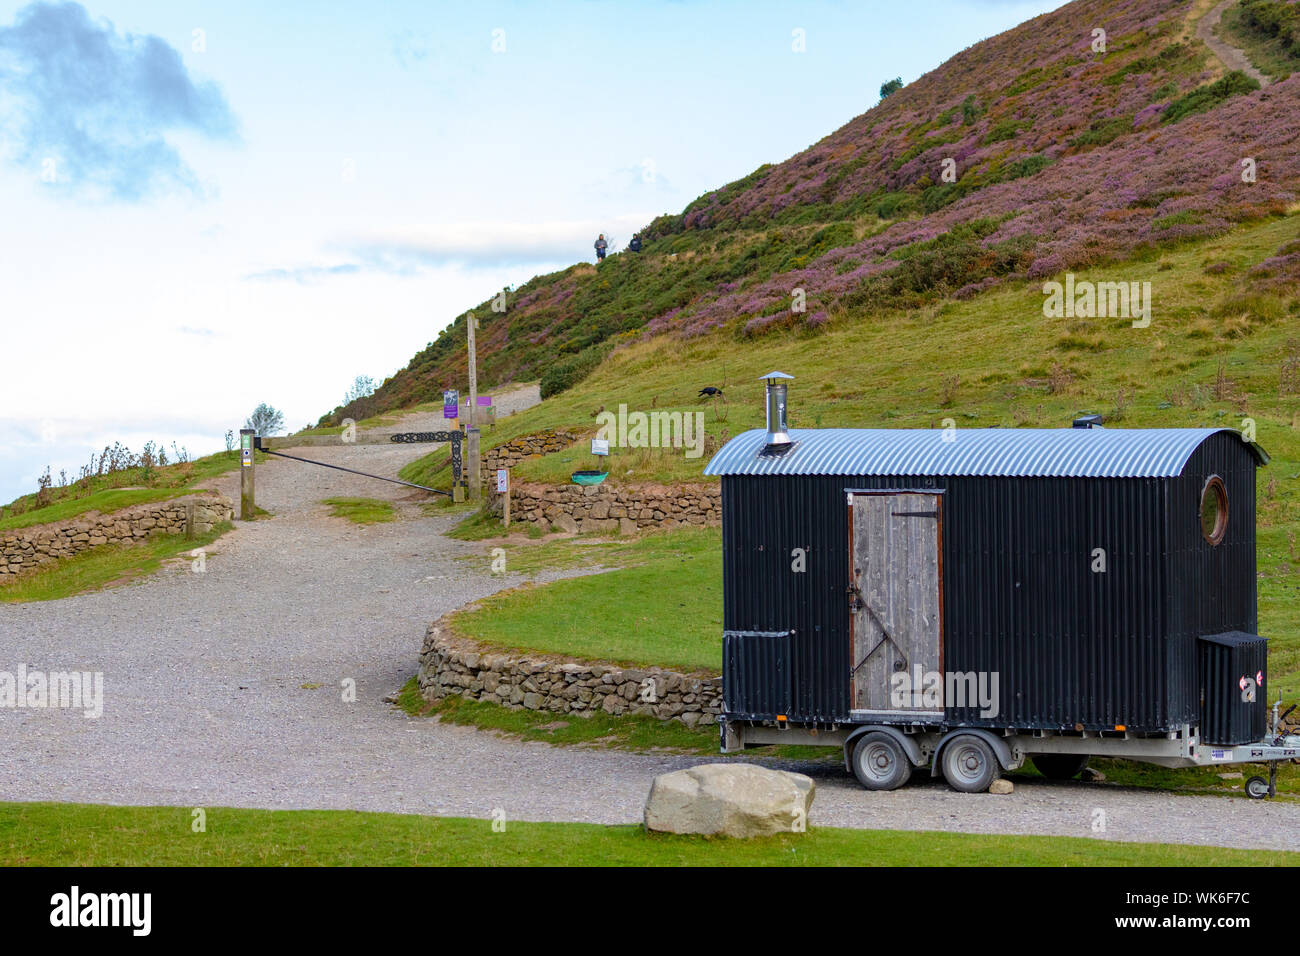 An old shepherds hut used as a cafe between the border of Denbighshire and Flintshire along the offa's dyke path at Moel Famau ,North Wales, UK Stock Photo